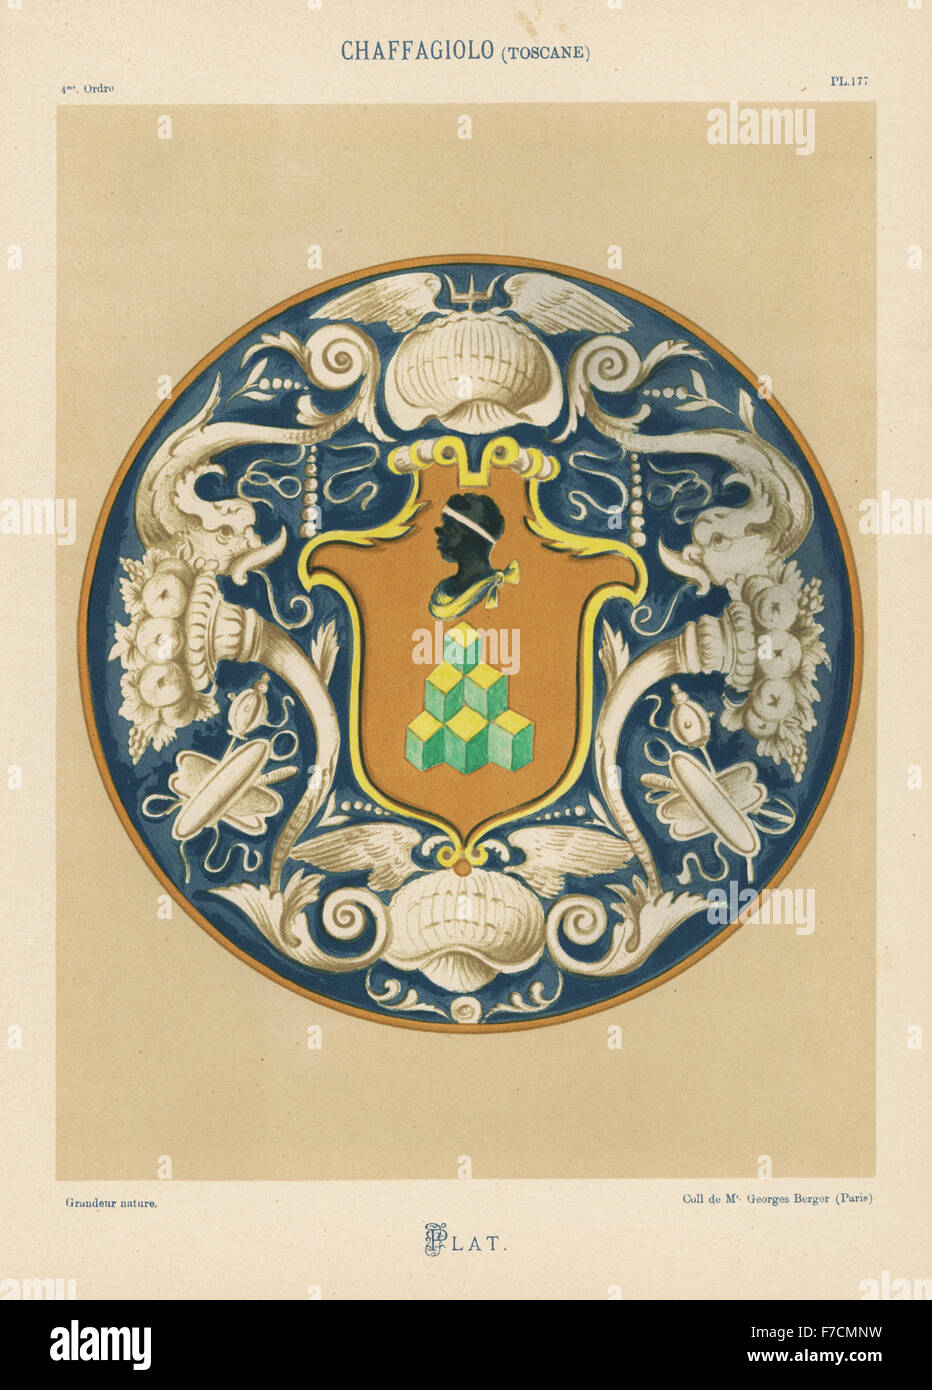 Plate from Chaffagiolo, Tuscany, Renaissance enamel ware, with Moor's head within escutcheon, border of dolphins, shells and cornucopia. Hand-finished chromolithograph from Ris Paquot's General History of Ancient French and Foreign Glazed Pottery, Chez l'Auteur, Paris, 1874. Stock Photo